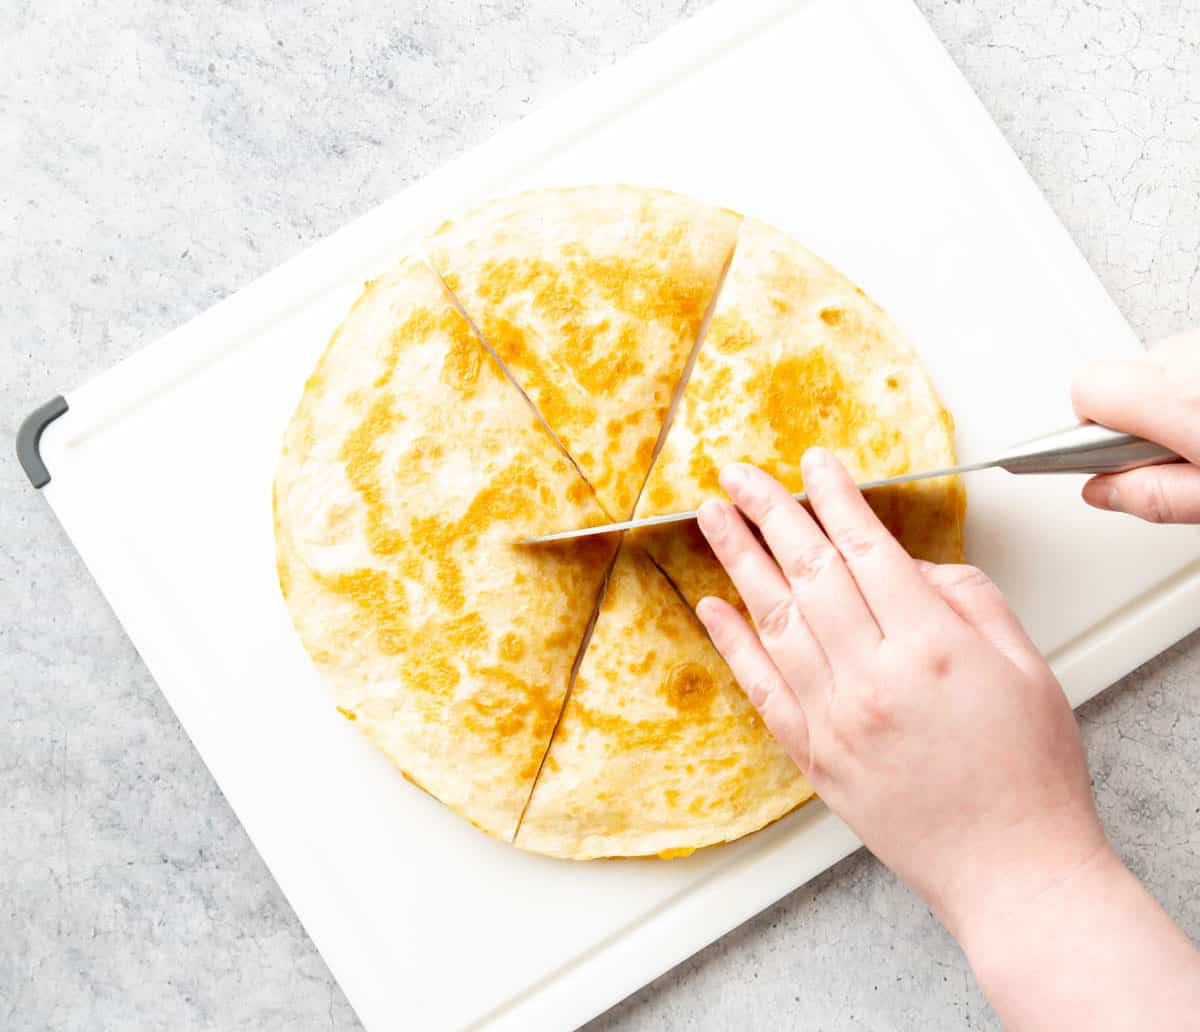 slicing the crisped tortilla into sixths on a cutting board